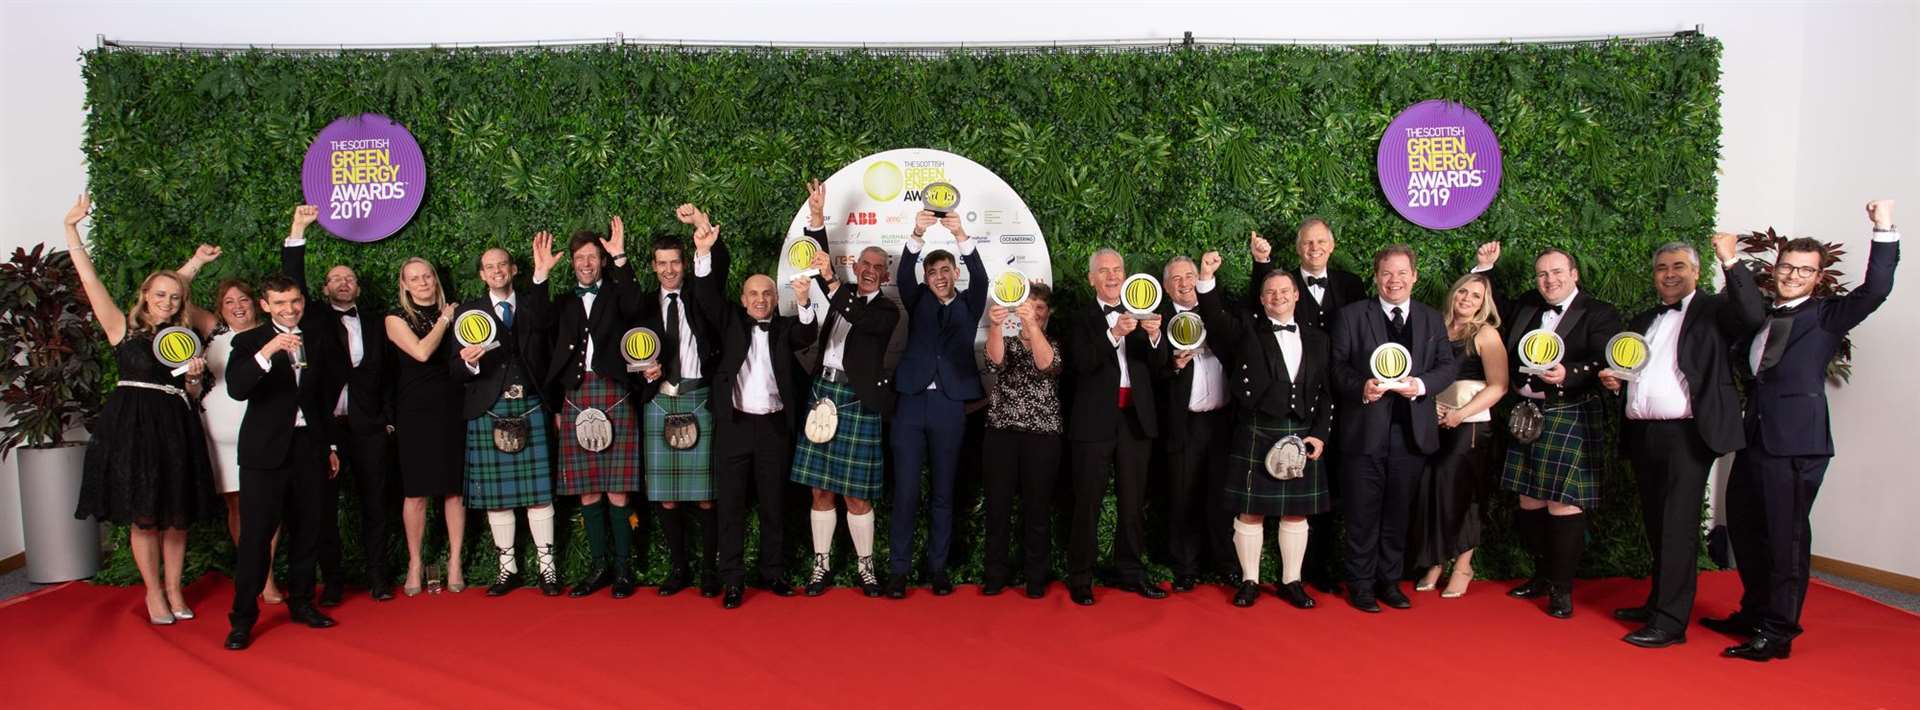 Winners will not be able to gather as usual at this year's Scottish Green Energy Awards.